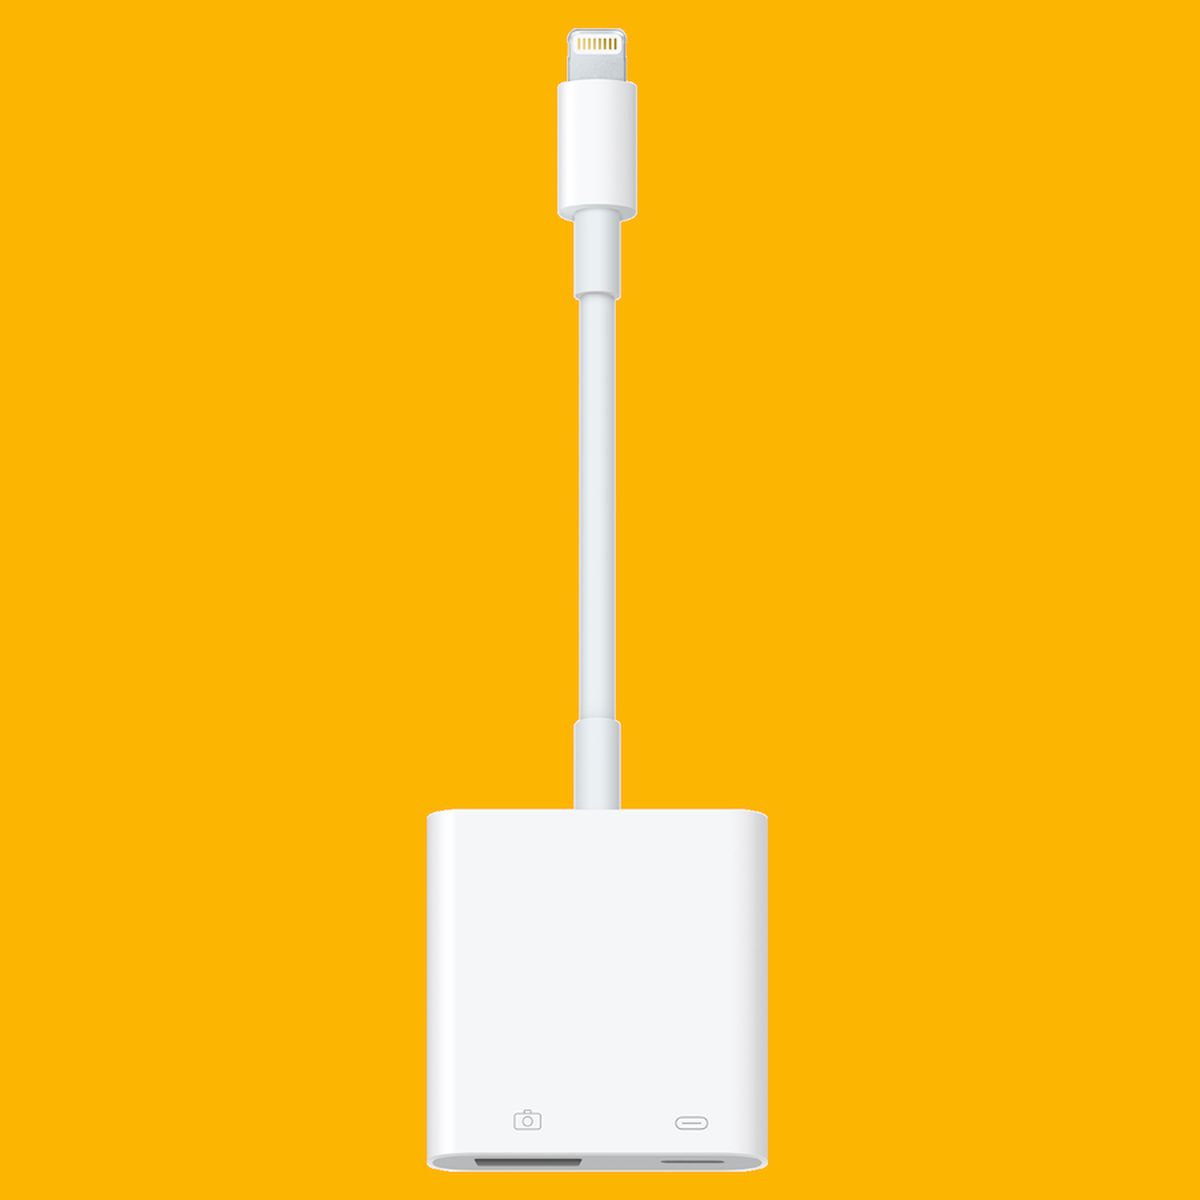 Apple® Lightning® to USB Camera Adapter Connect USB devices